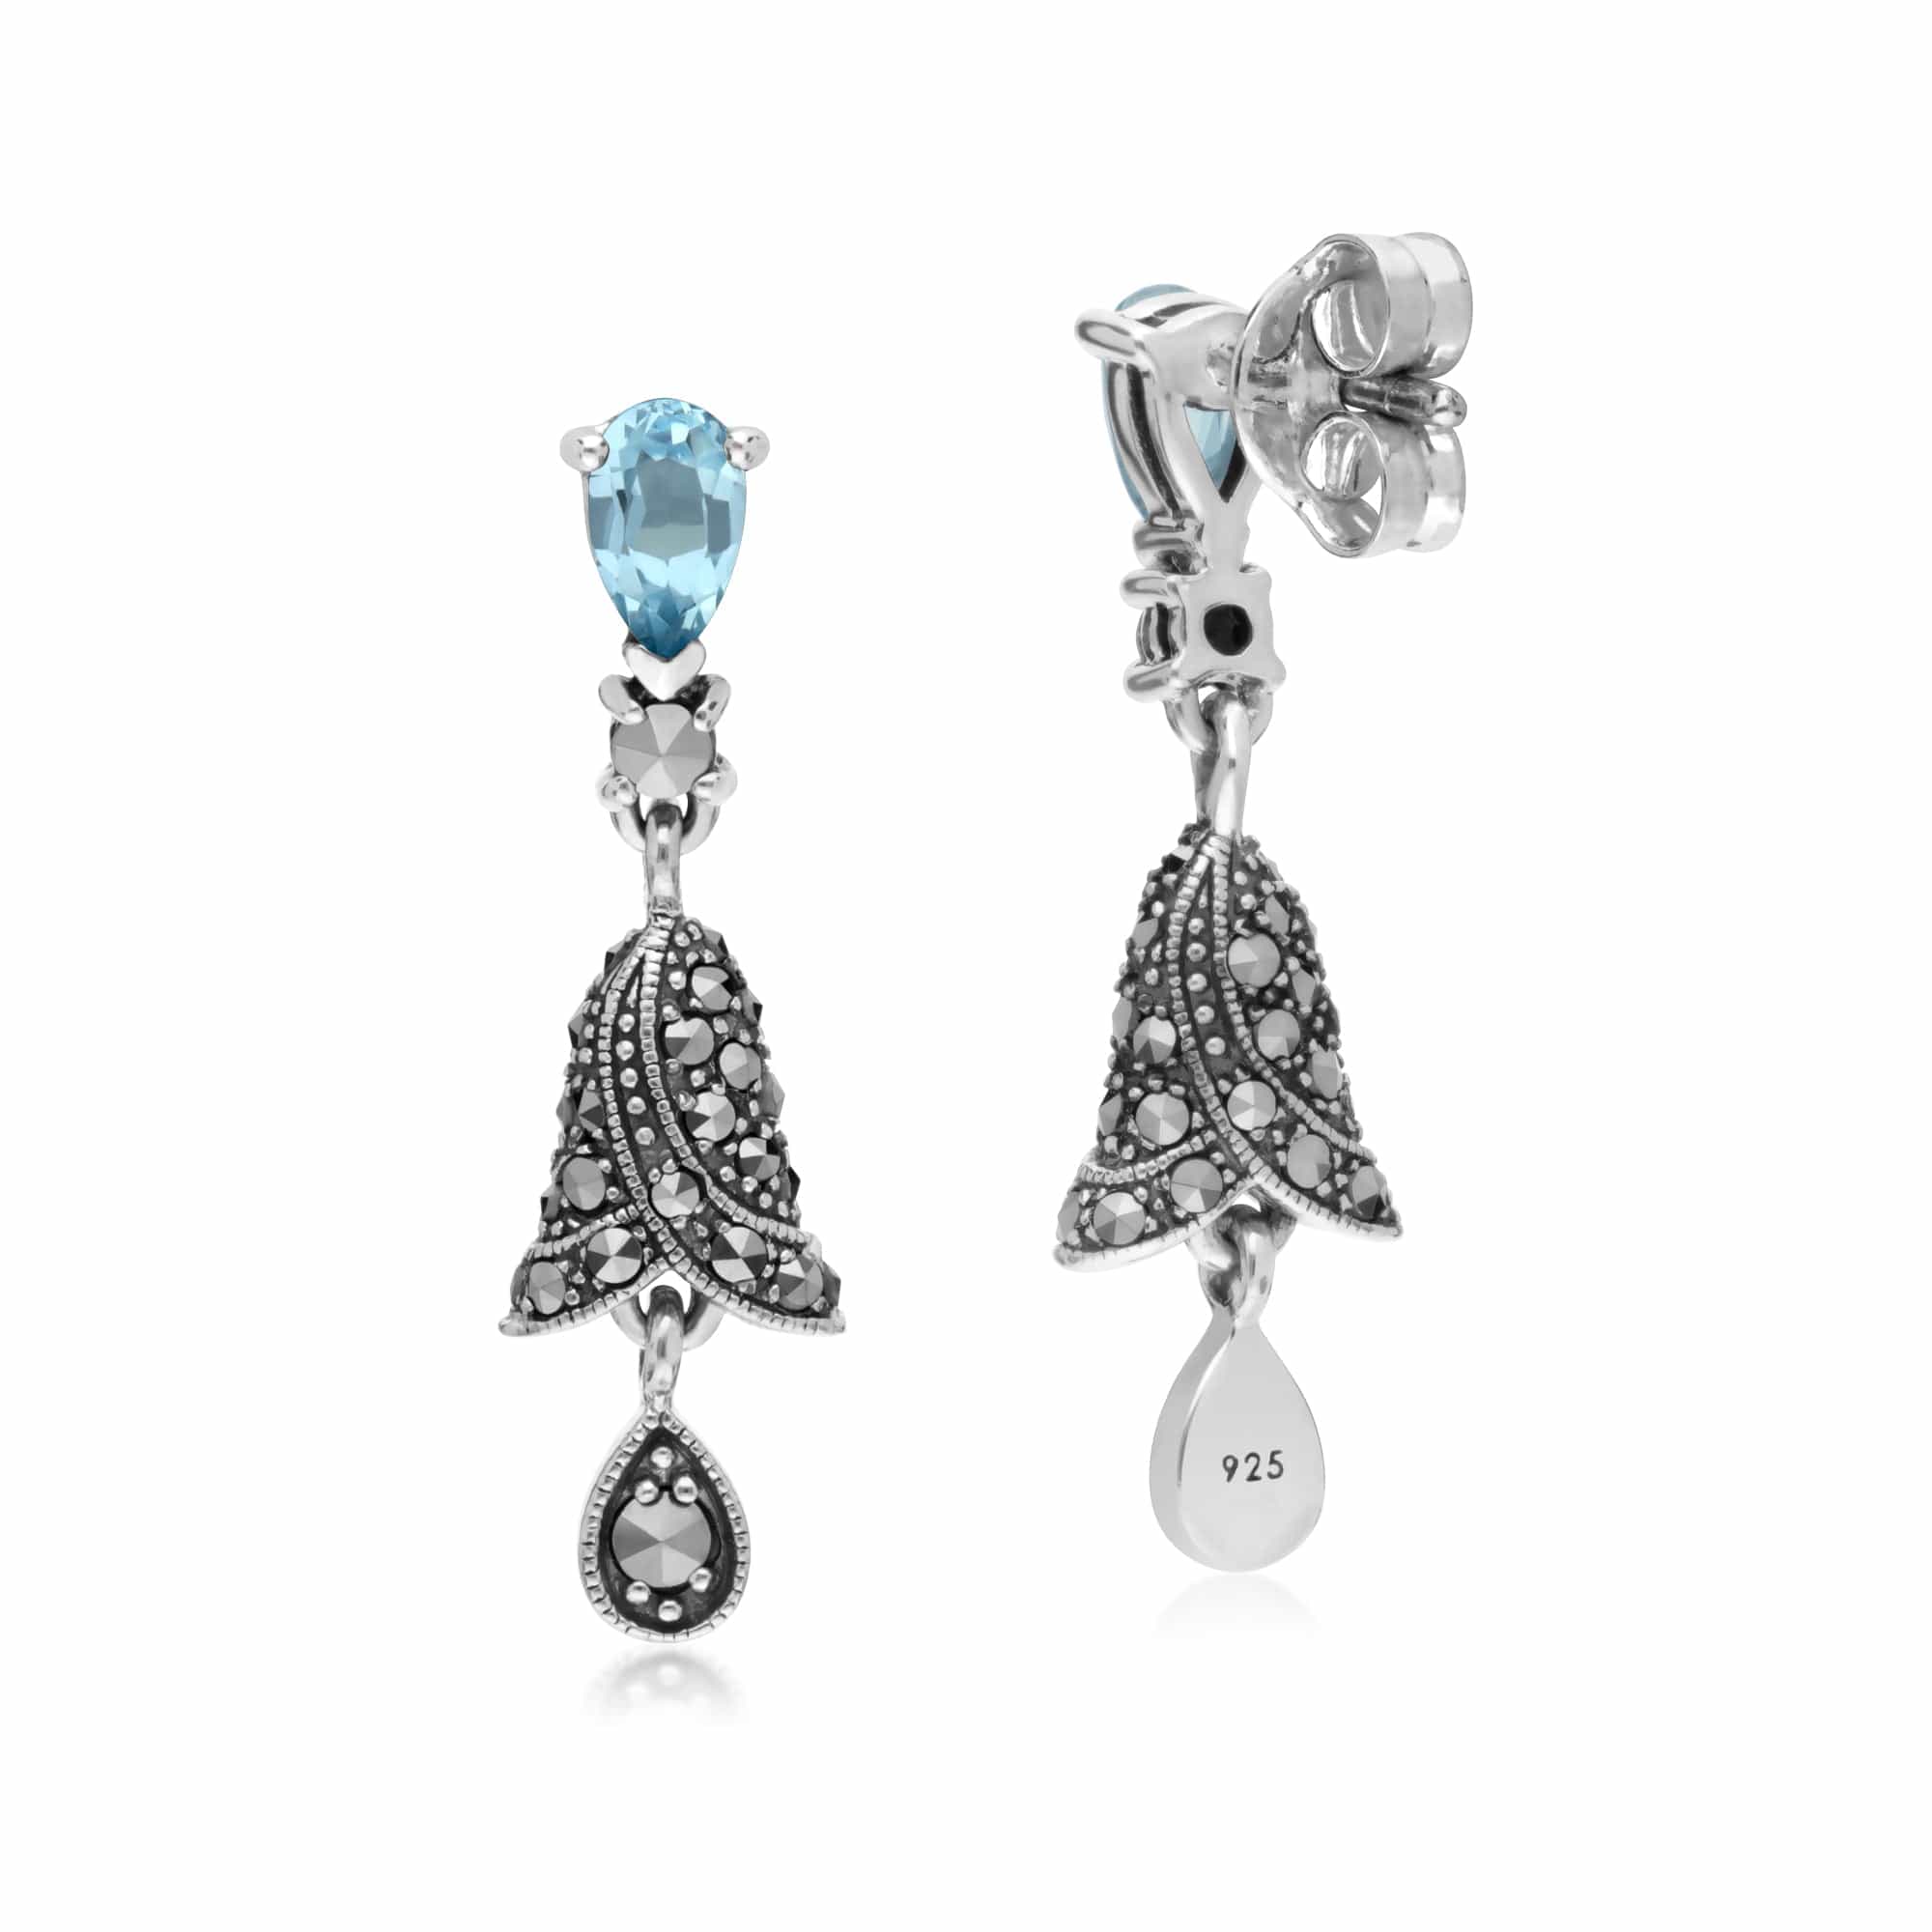 214E873101925 Art Nouveau Style Blue Topaz and Marcasite Bell Drop Earrings in 925 Silver 2